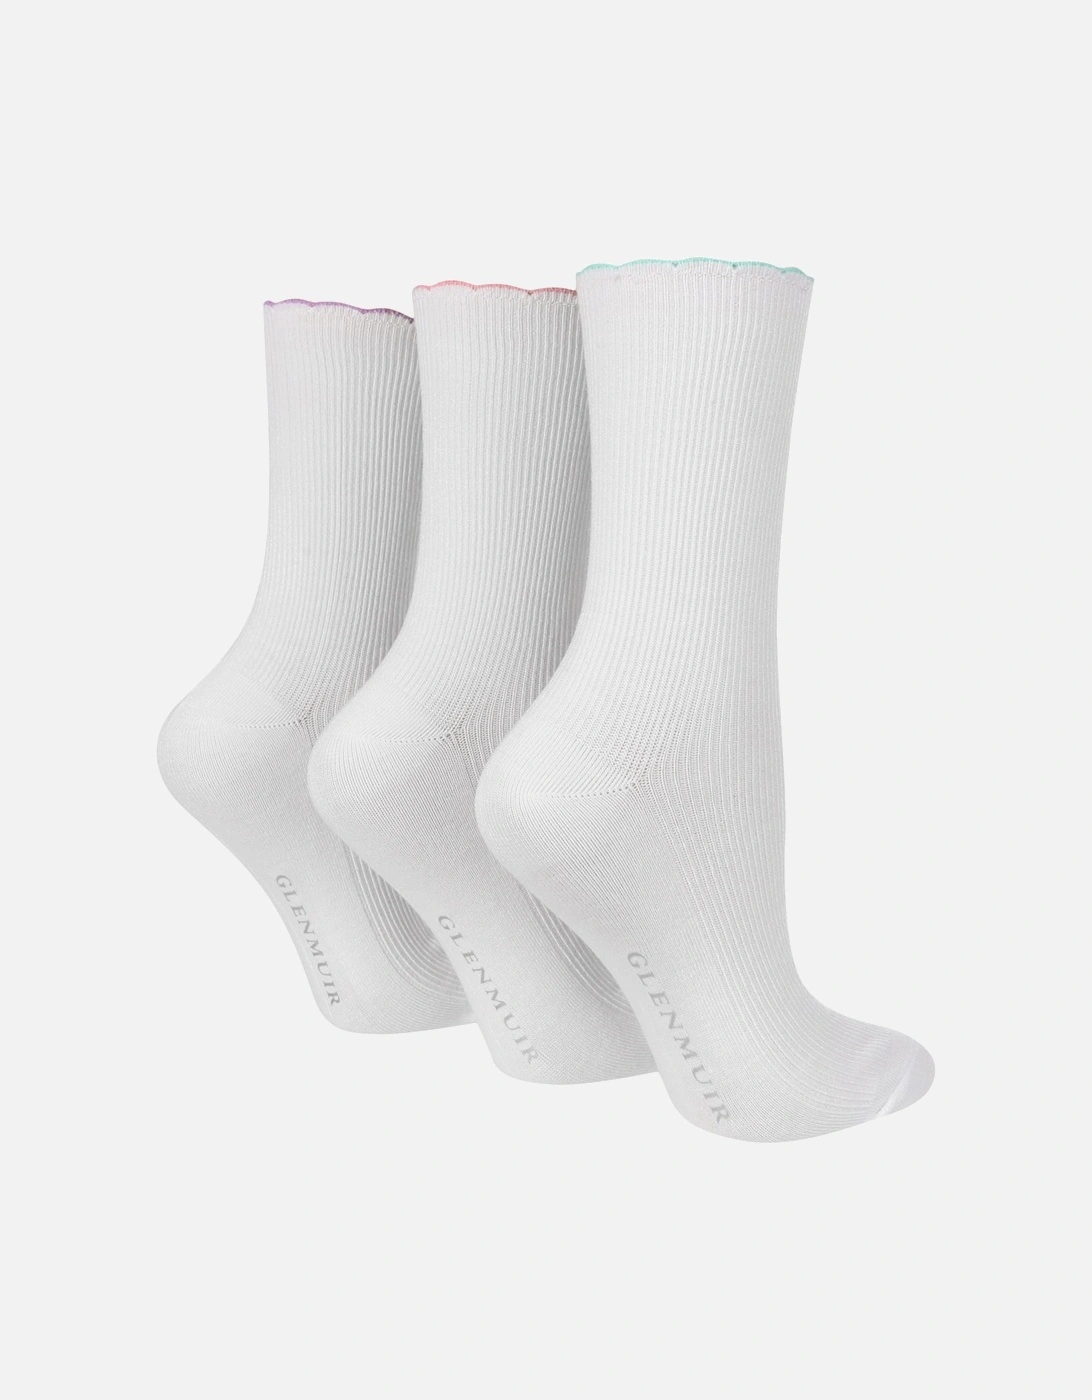 3 PAIR LADIES SOCKS RIBBED SCALLOP HEM WITH COLOURED TIPPING, 2 of 1